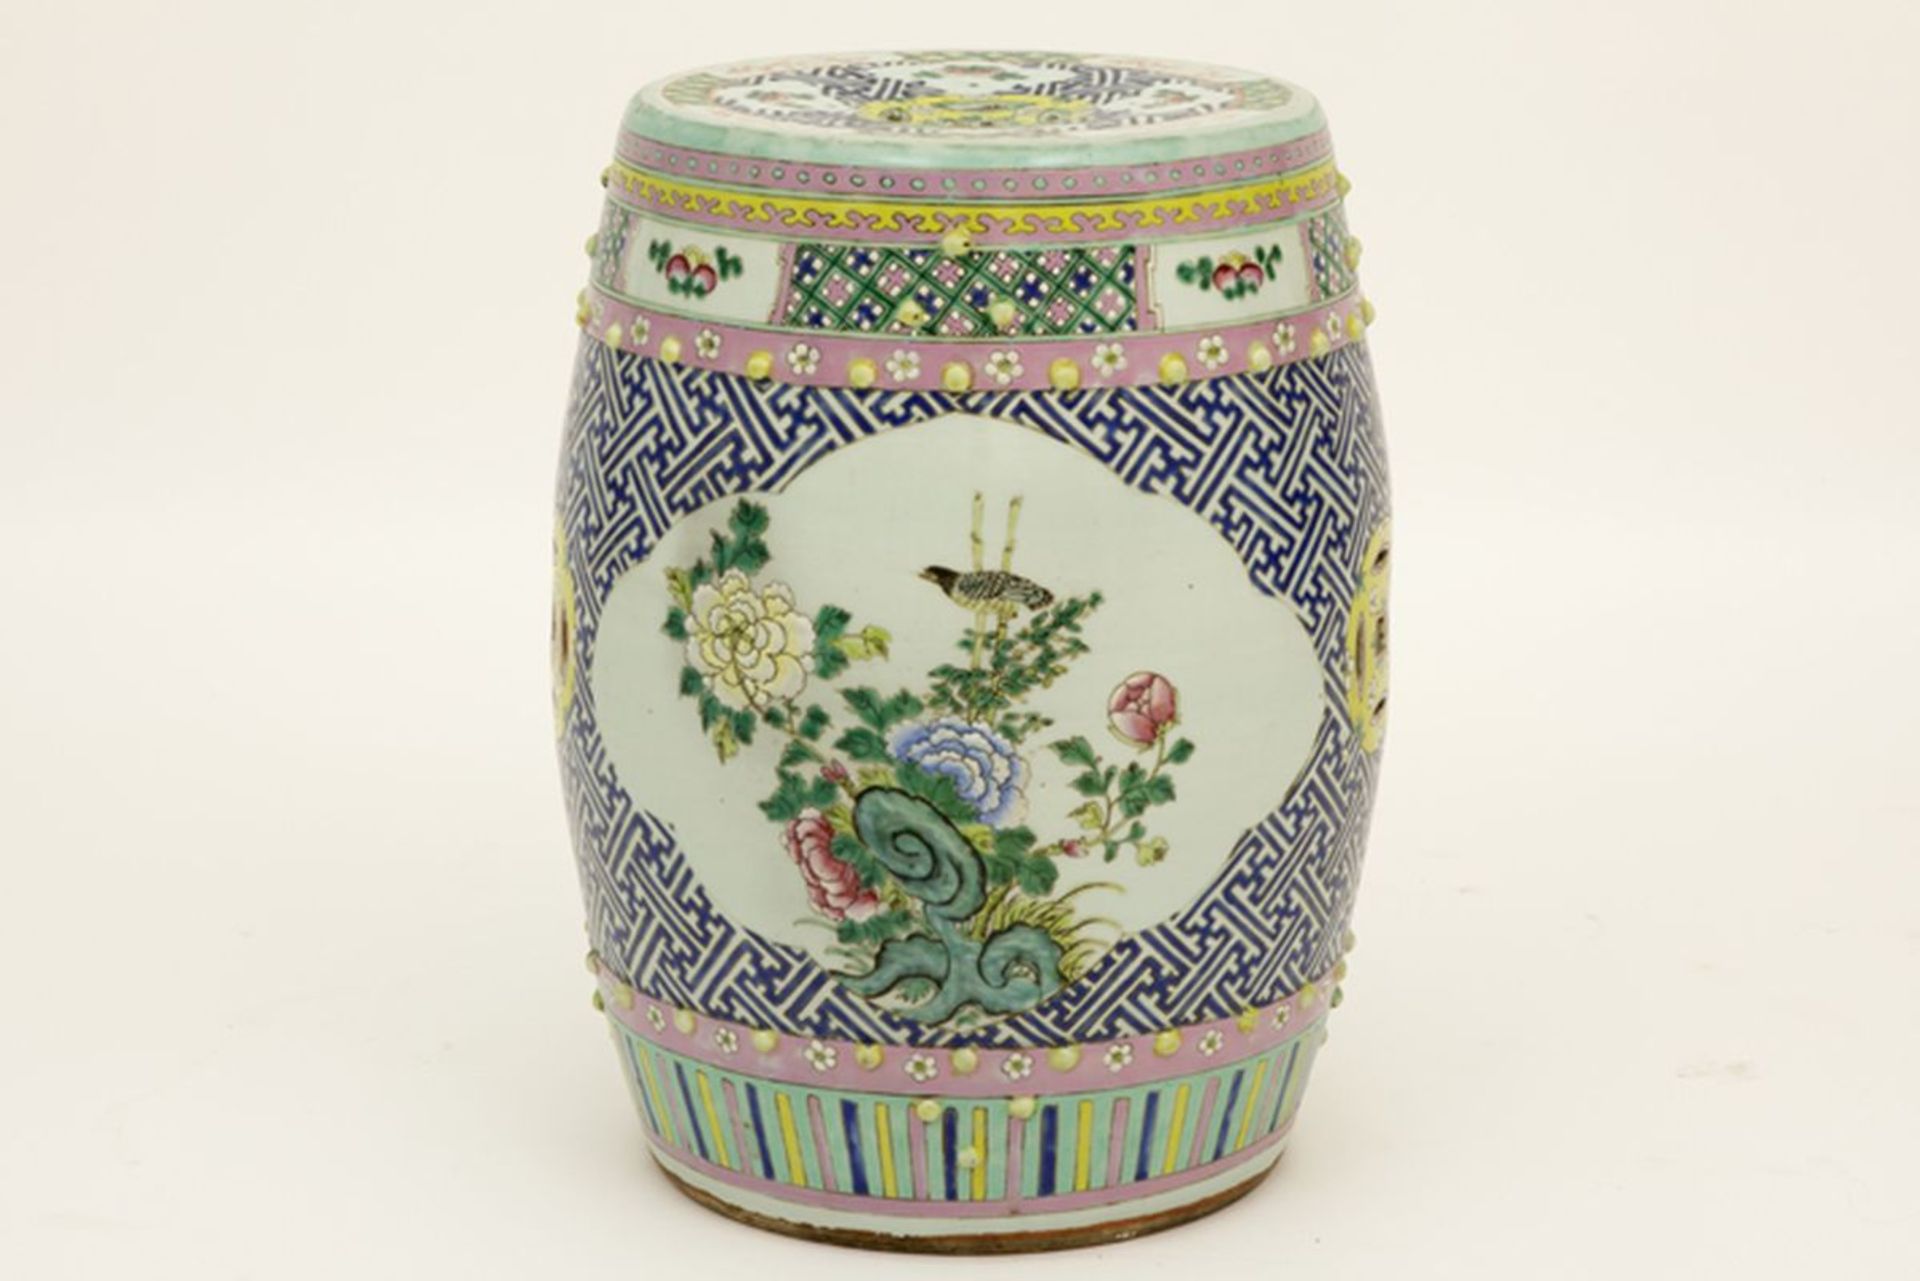 antique Chinese garden stool in porcelain with polychrome decor - - Antiek Chinees [...]